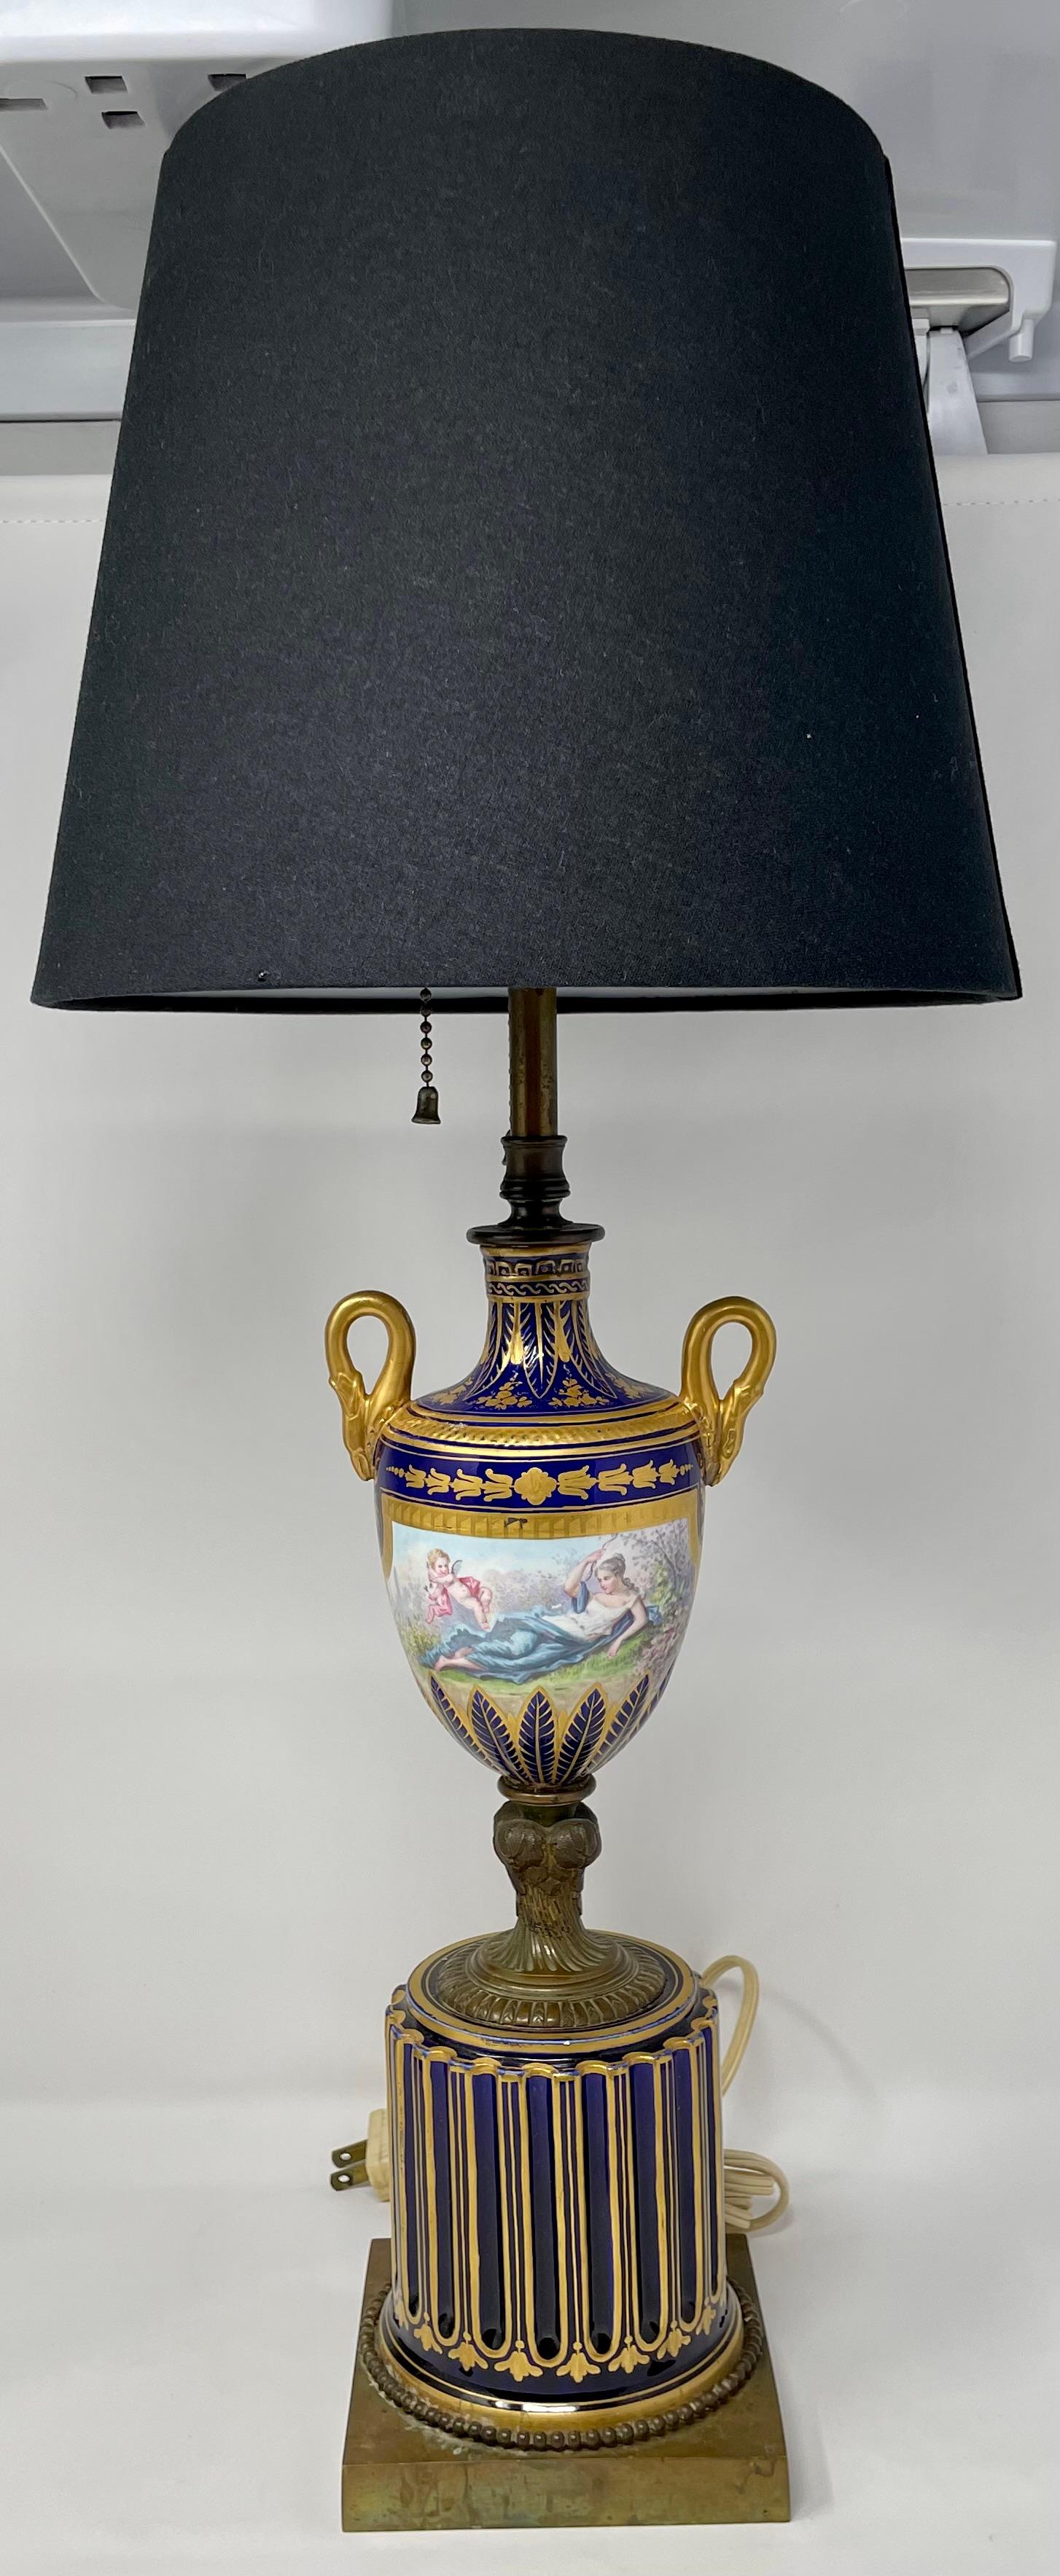 Pair Antique Late 19th Century French Cobalt Blue & Gold Fine Quality Porcelain Lamps.
Shade: 10